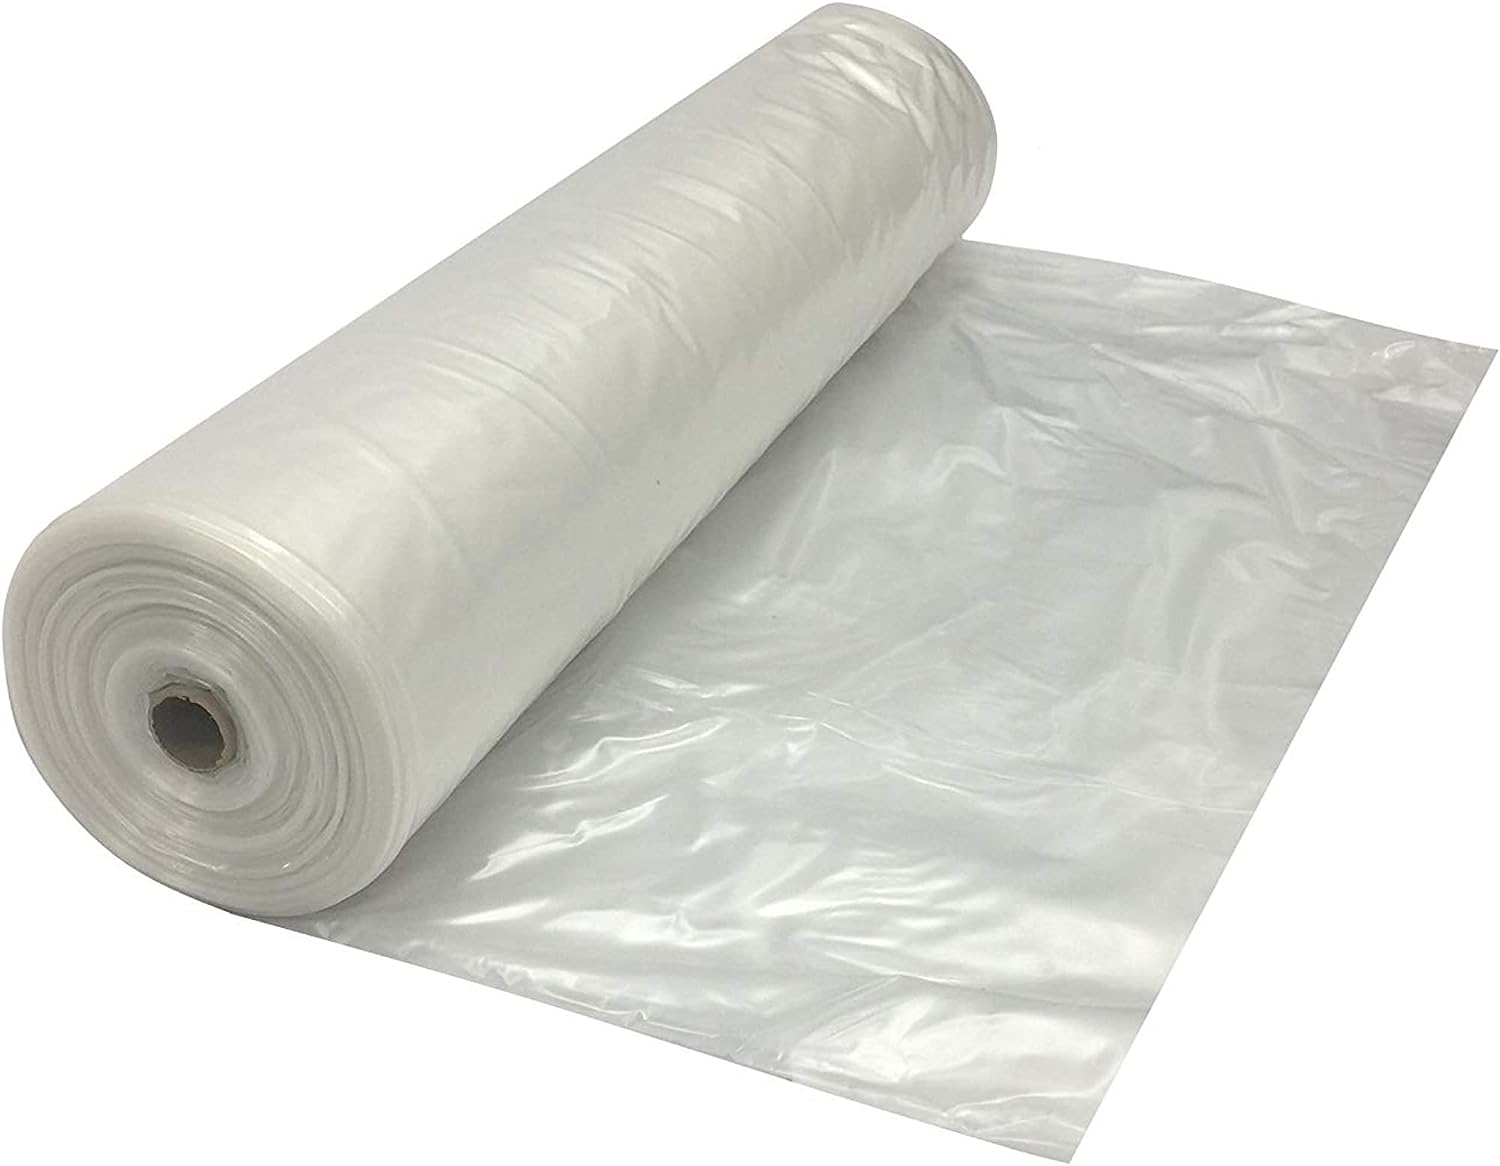 Poly Sheeting, 6 mil, 10' x 100' Clear